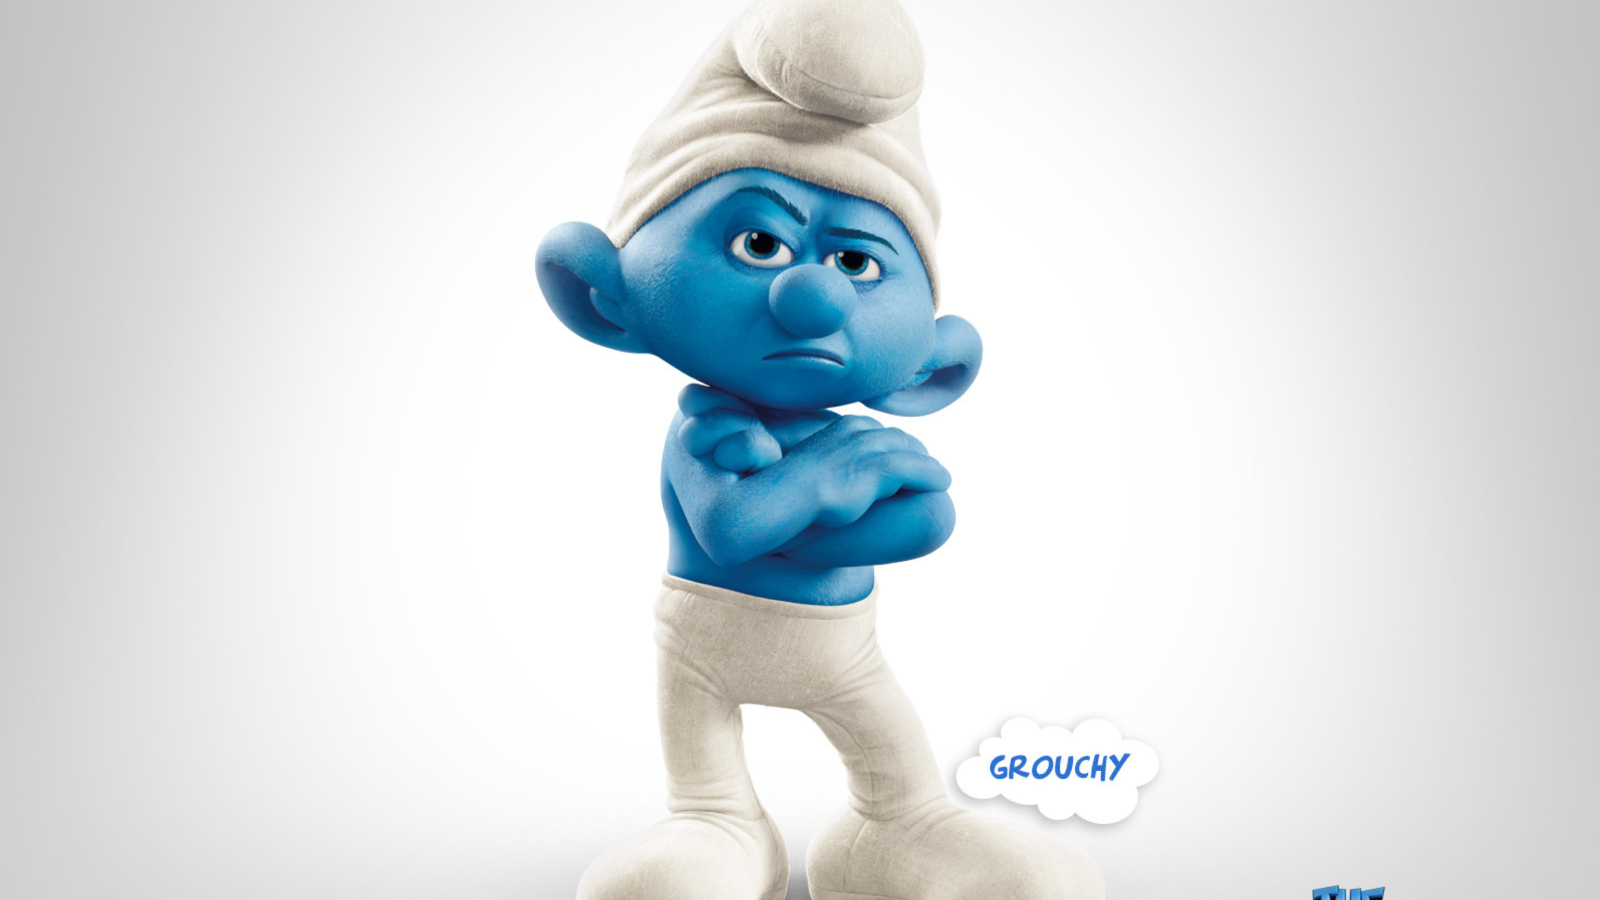 Grouchy The Smurfs 2 wallpaper 1600x900